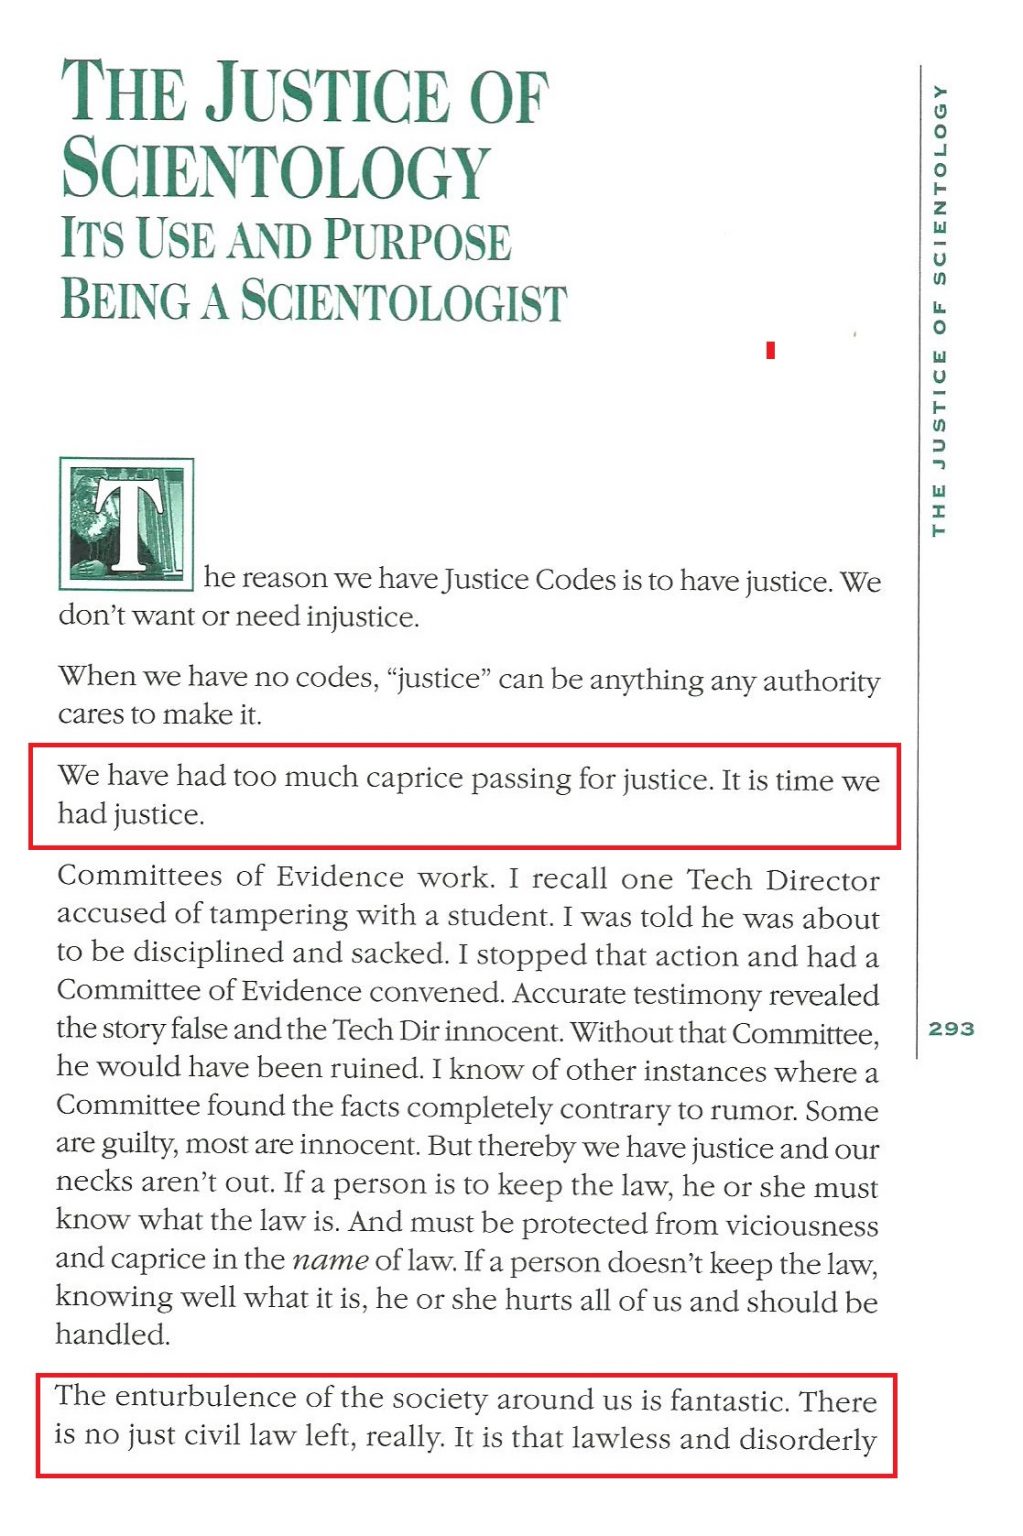 Mike Rinder: The Church of Scientology Caught in a Big Lie in the Danny Masterson Rape Case